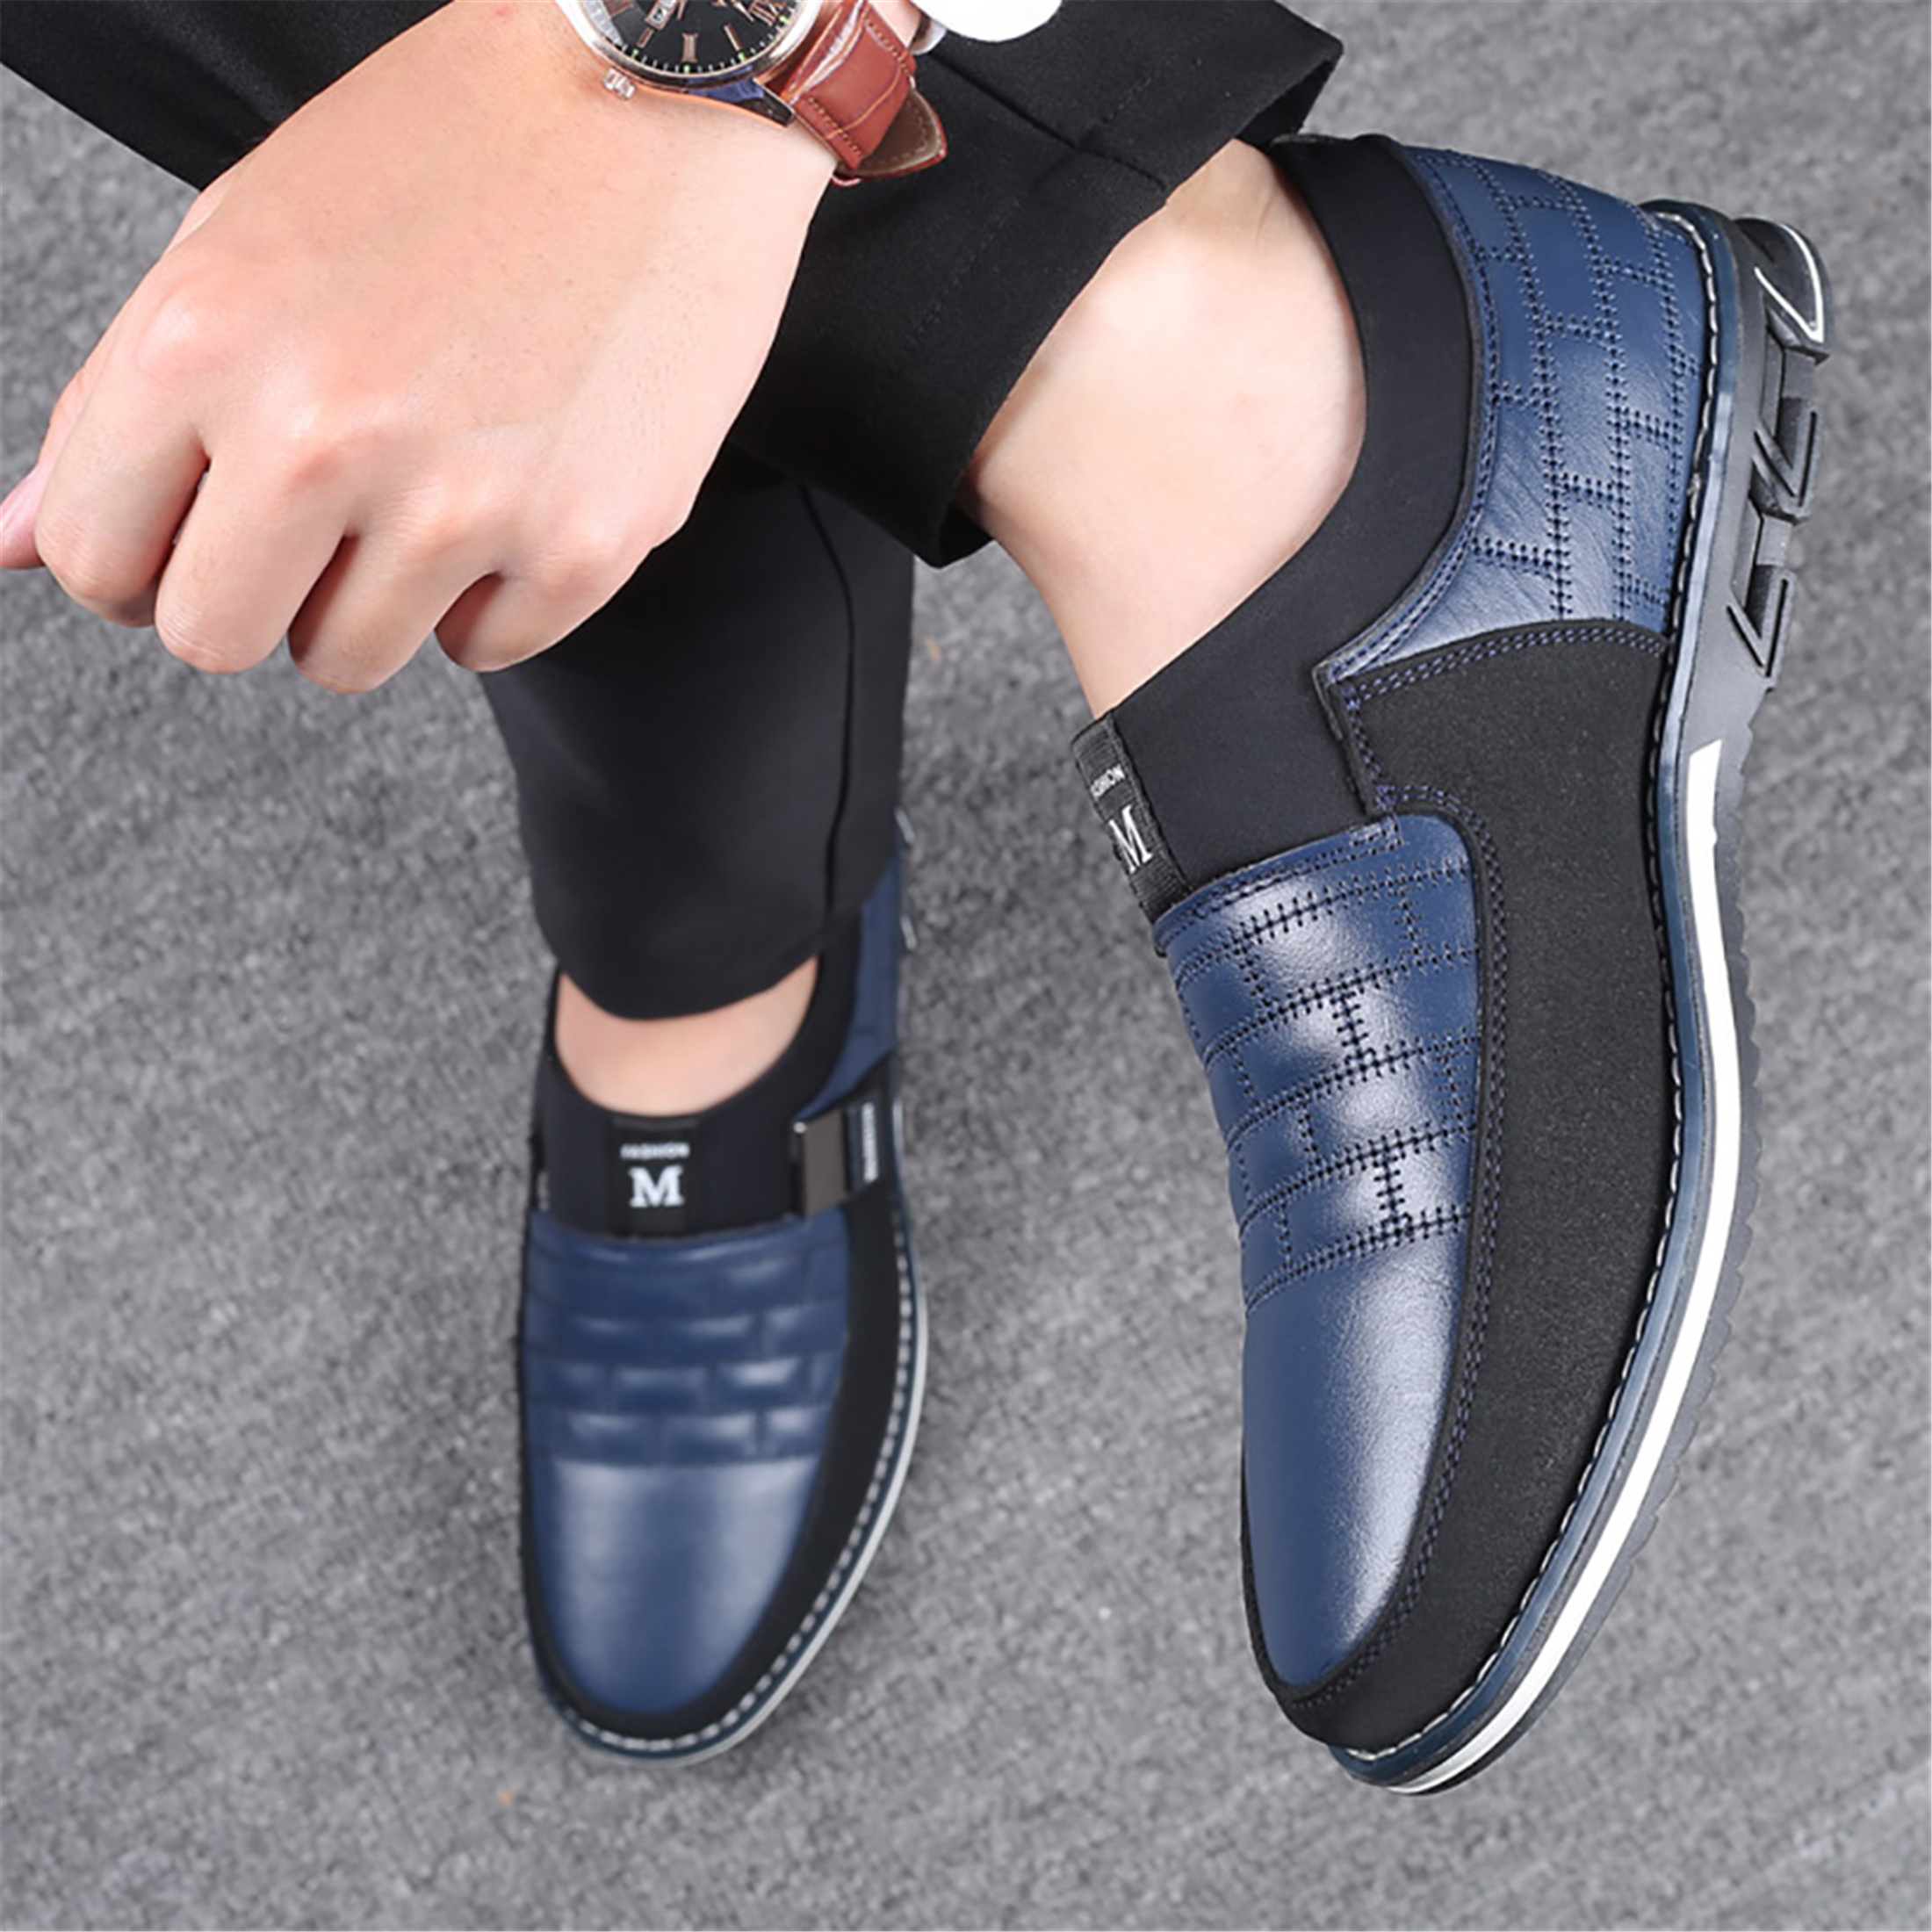 COSIDRAM Mens Casual Shoes Non-slip Sneakers Breathable Comfort Walking Shoes for Male Soft Bottom Loafers - image 5 of 6